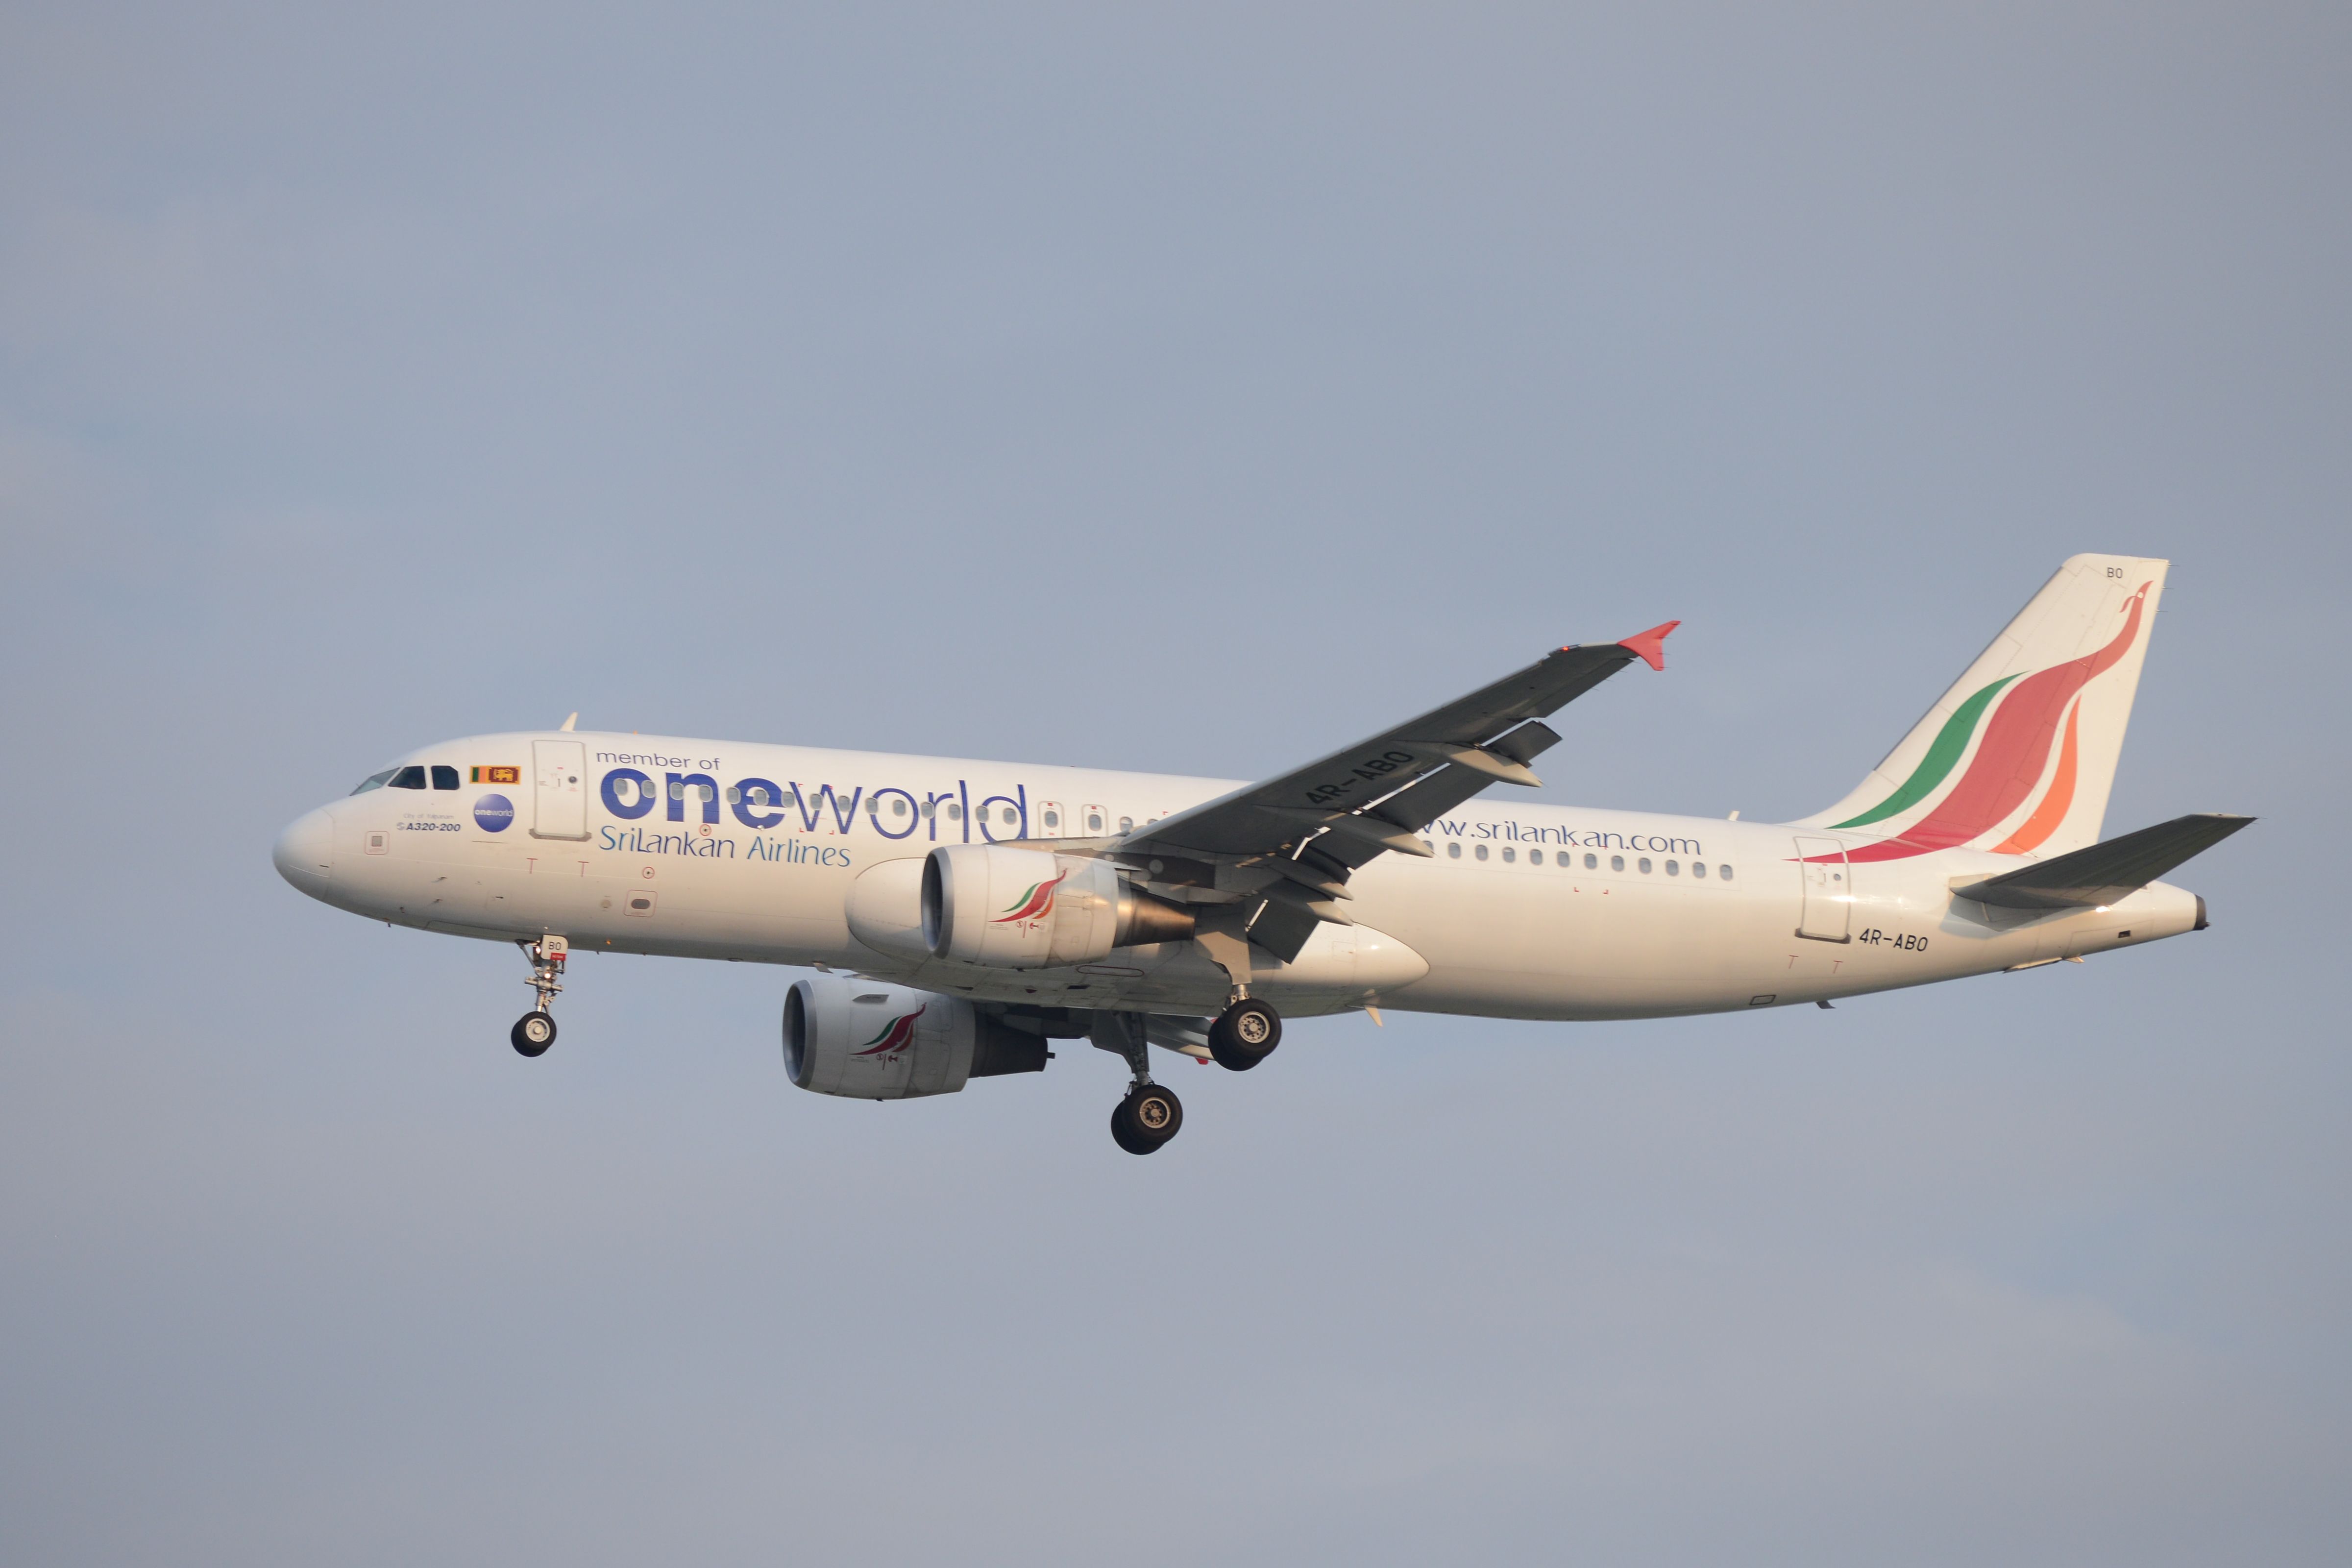 A SriLankan Airlines Airbus A320 in oneworld livery. 